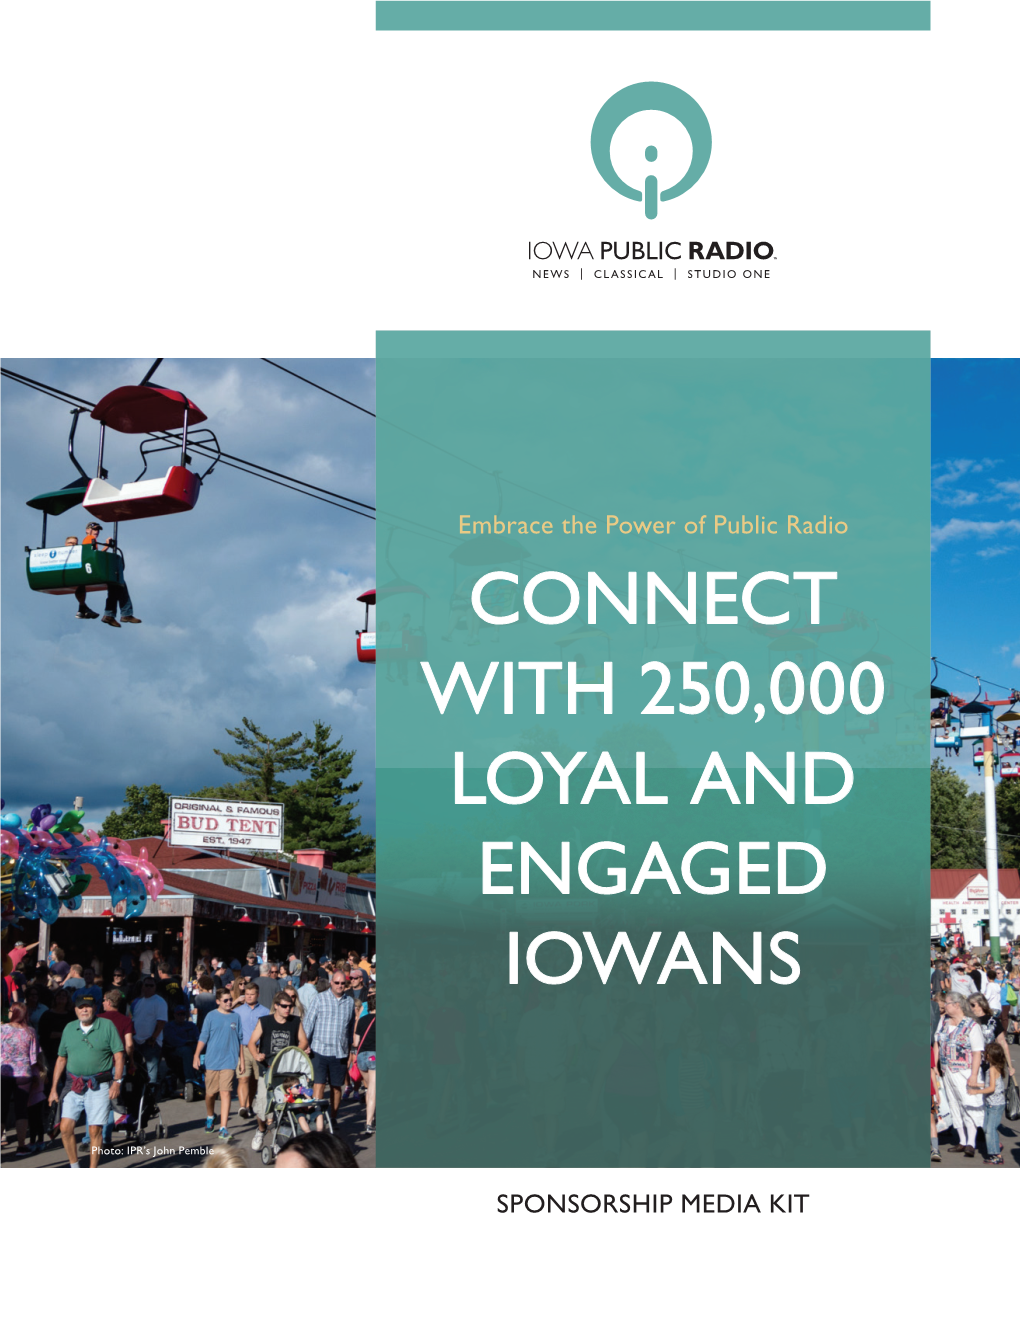 Connect with 250,000 Loyal and Engaged Iowans